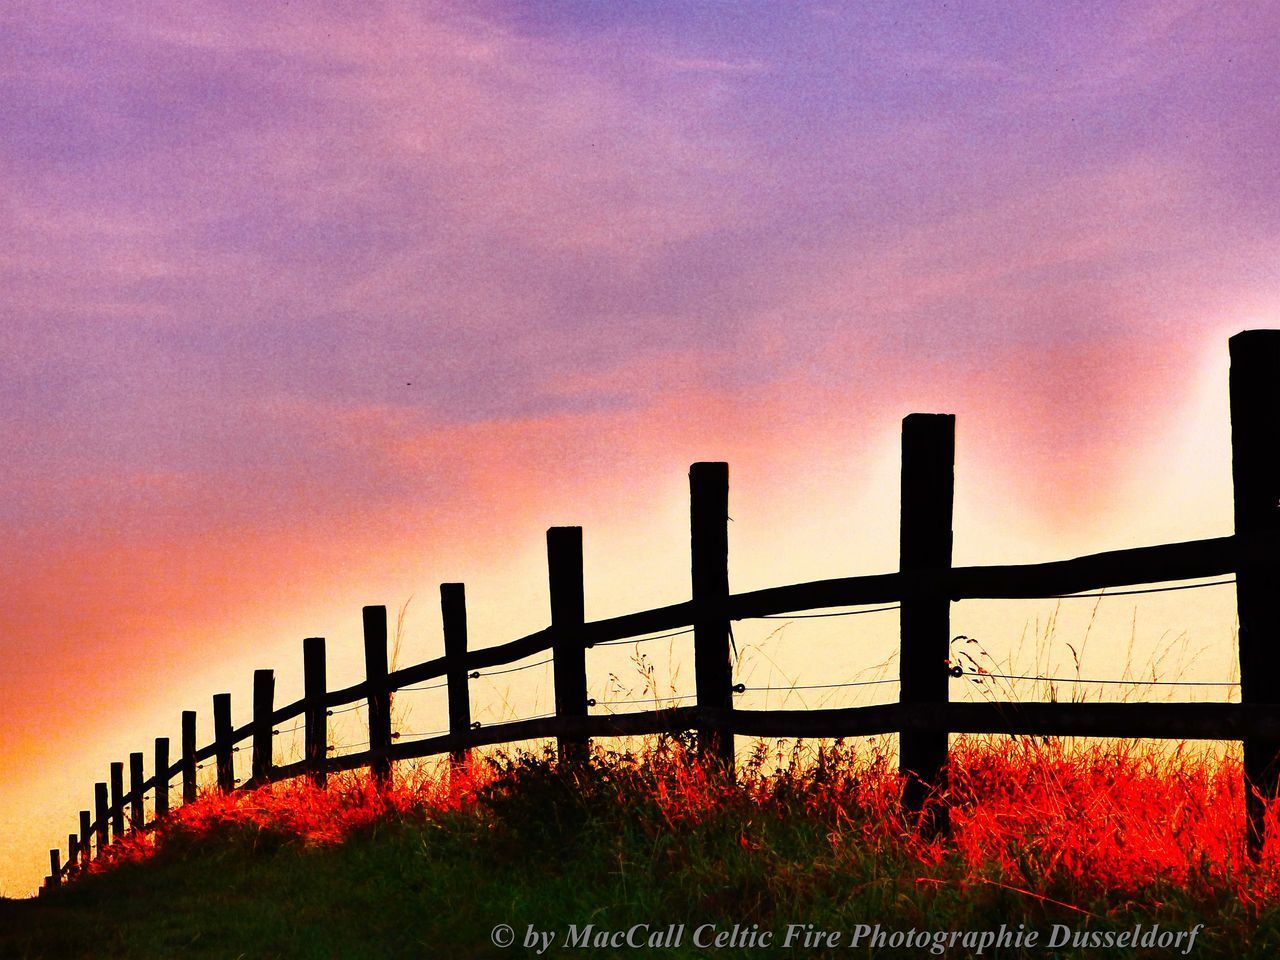 FENCE ON FIELD DURING SUNSET